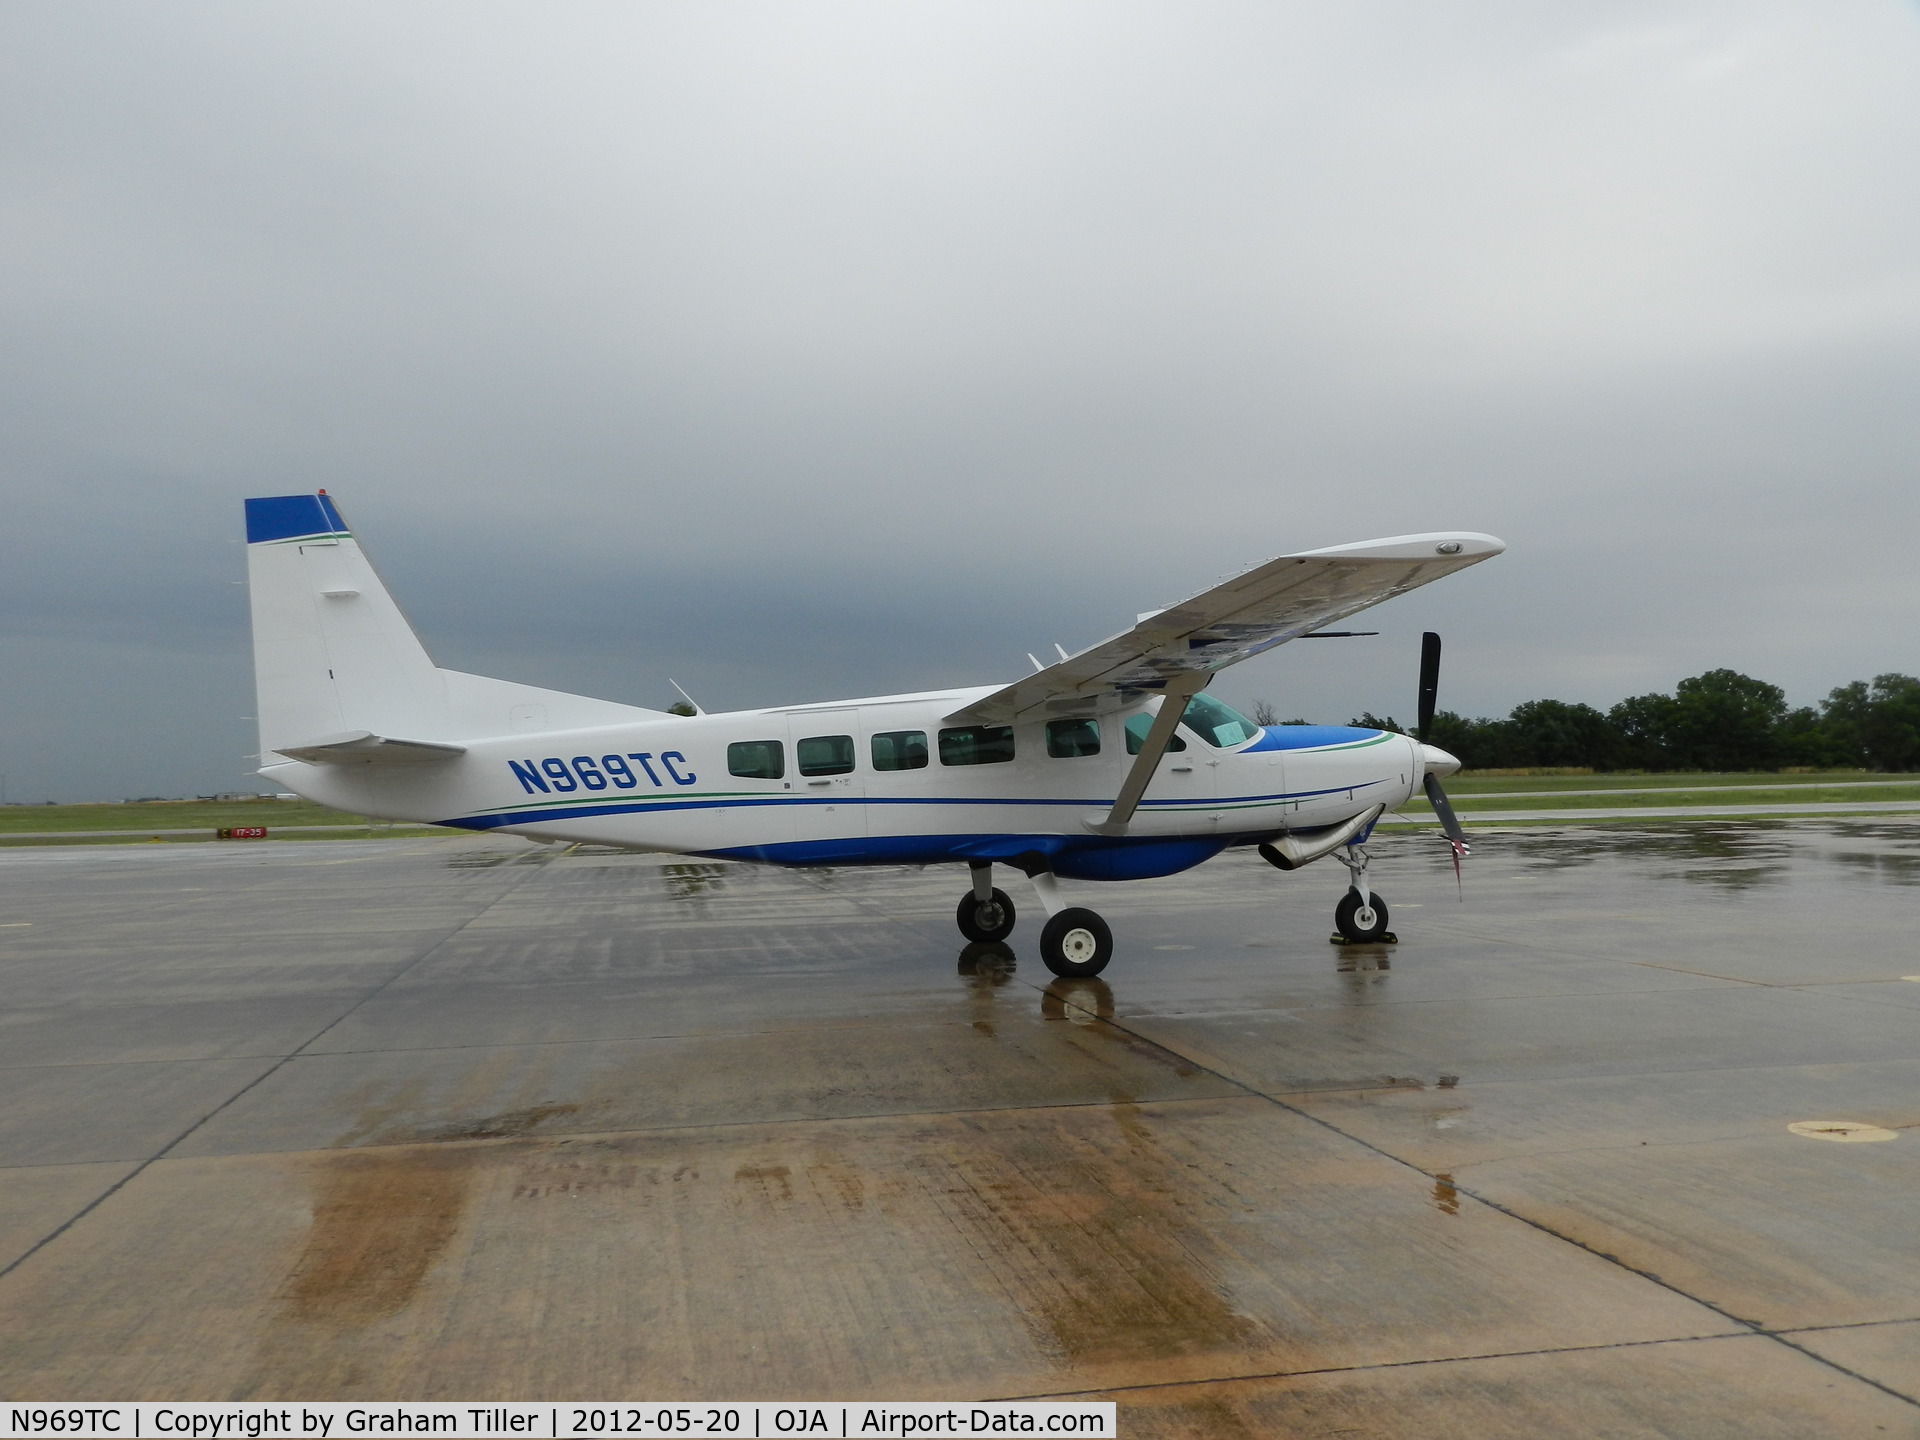 N969TC, Cessna 208 Caravan I C/N 20800532, at Weatherford, OK on a very wet Sunday in May 2012